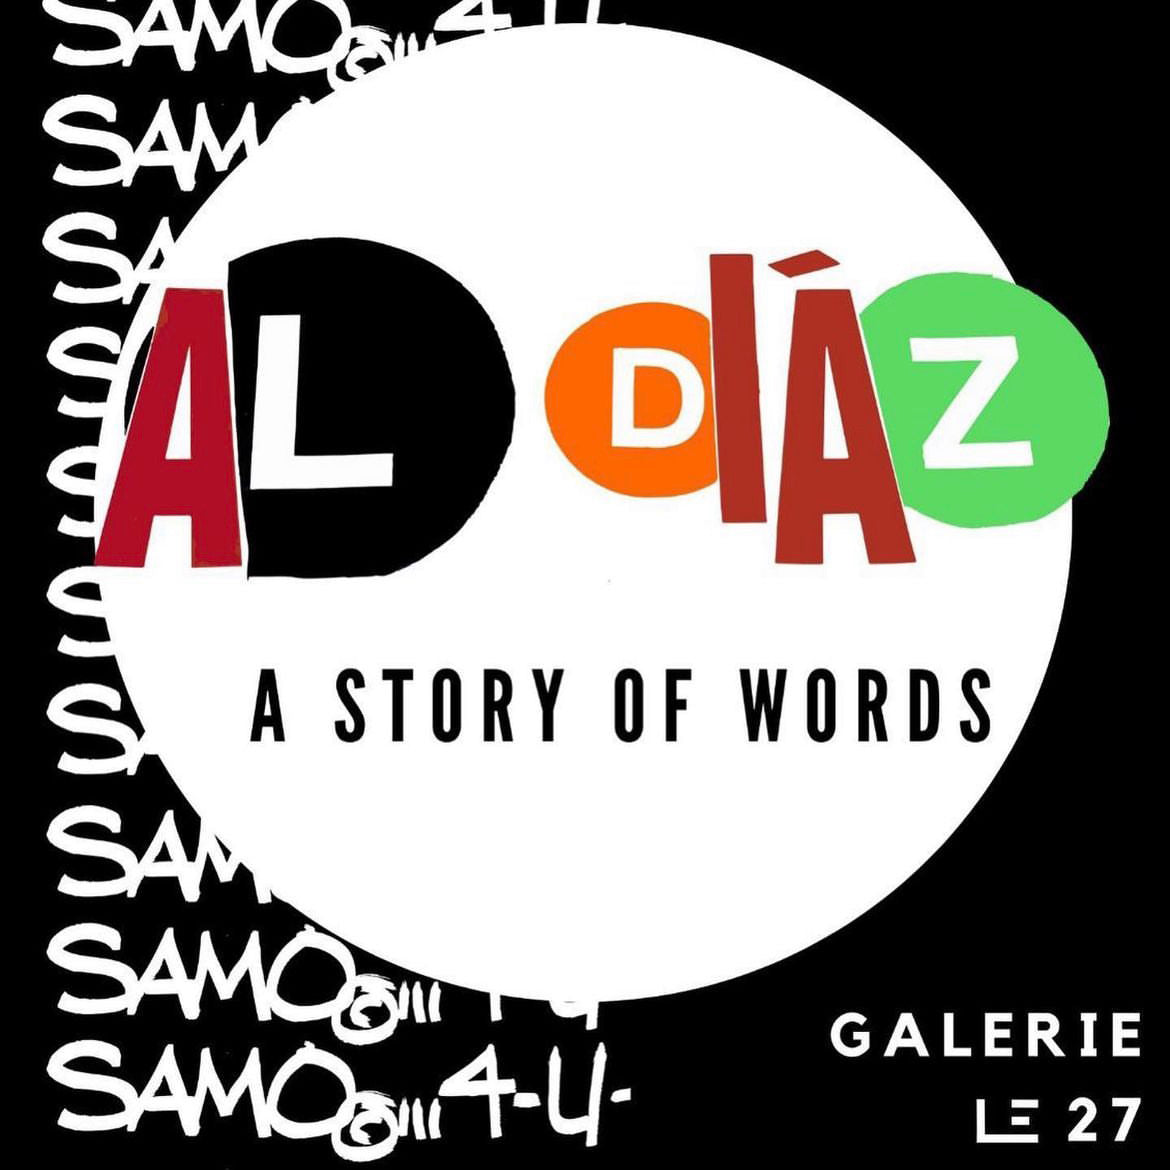 Al Diáz: “A Story of Words” Debut French Solo Exhibit at Galerie El 27, Ceret